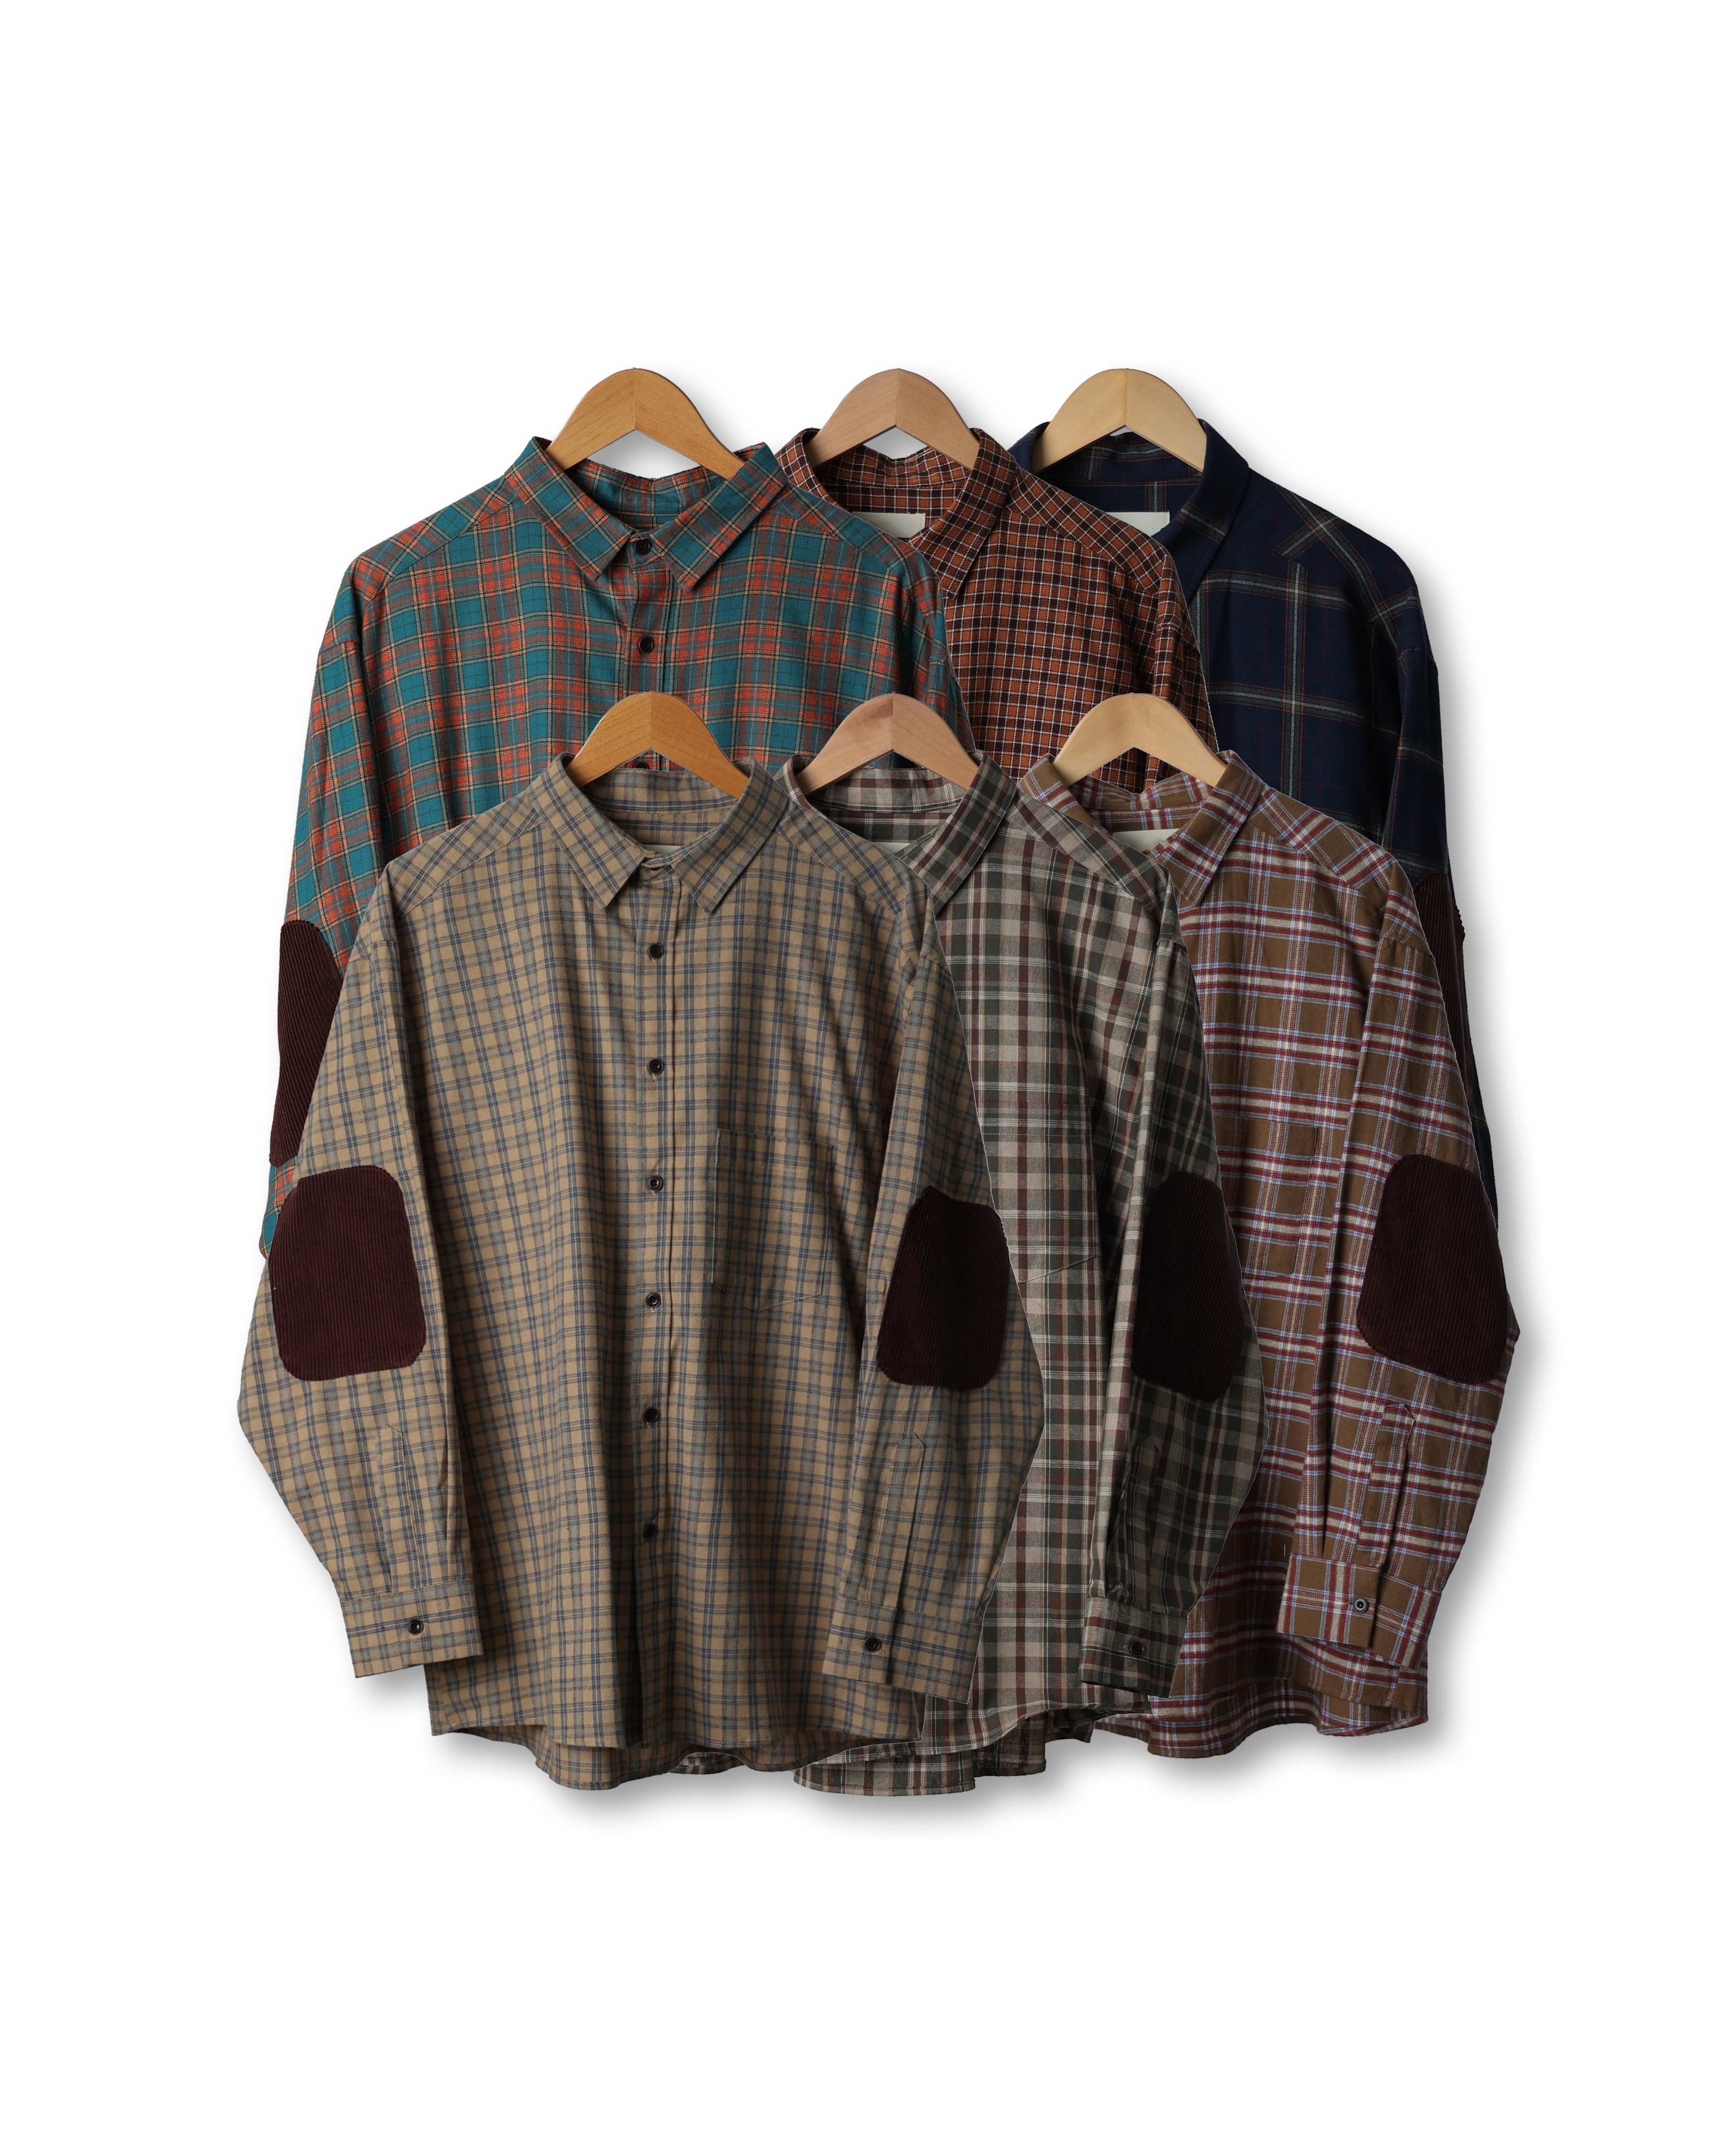 LIBERT RAY Patched Over Check Shirts (Navy/Green/Camel/Brown/Olive/Beige) - 8차 리오더 (네이비 4/19 배송예정)